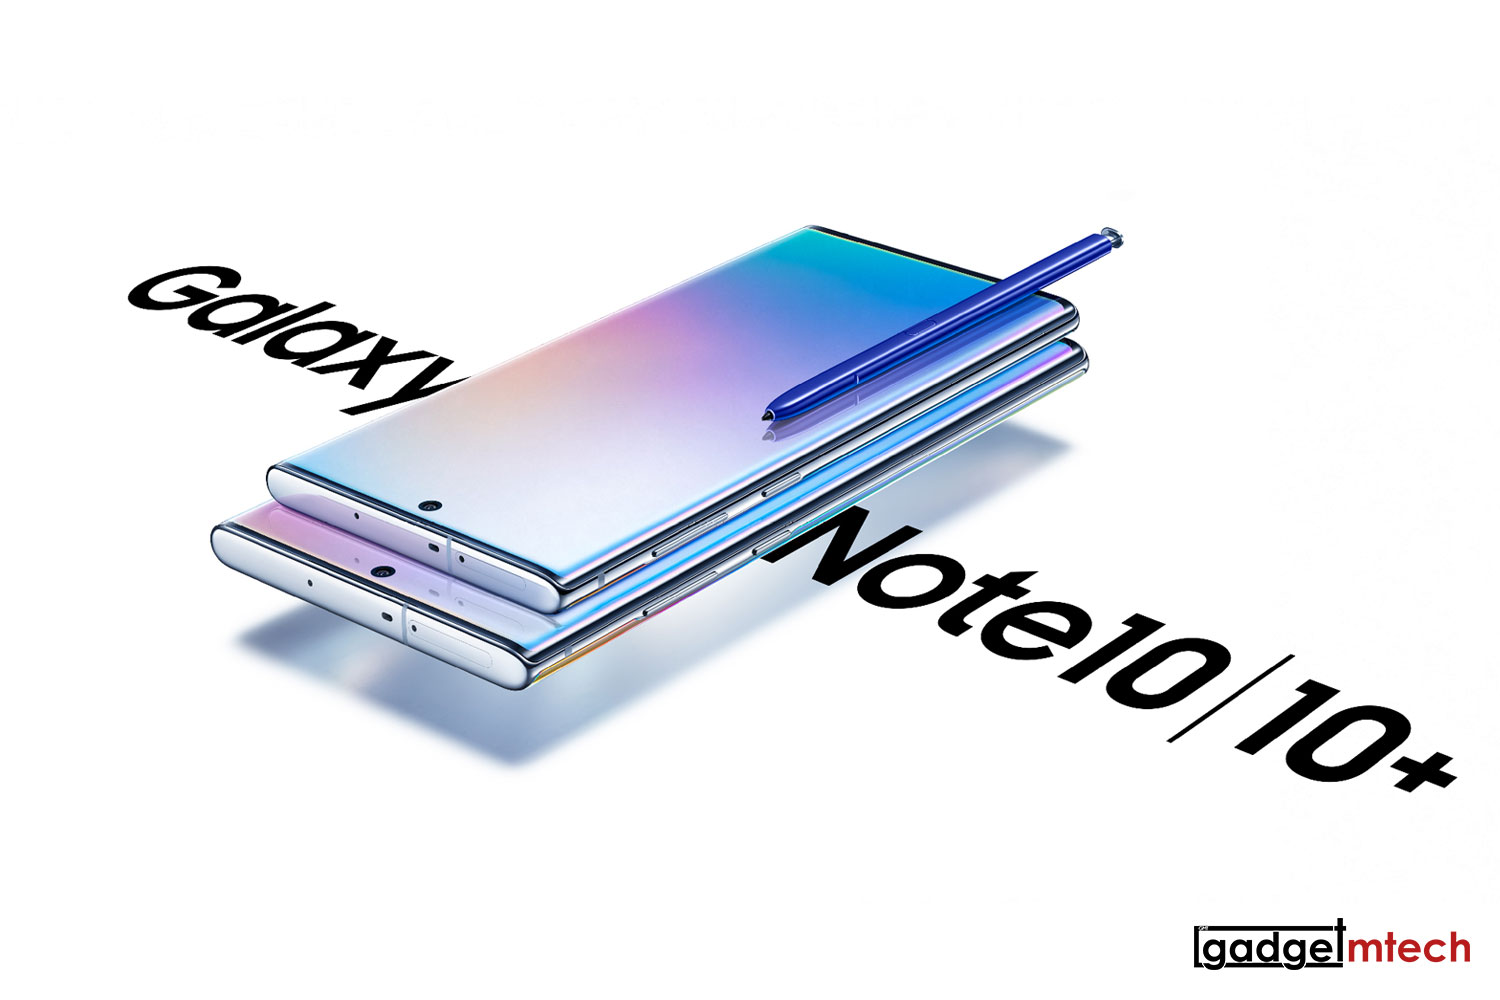 Samsung Galaxy Note10 Officially Announced, Priced from RM3,699